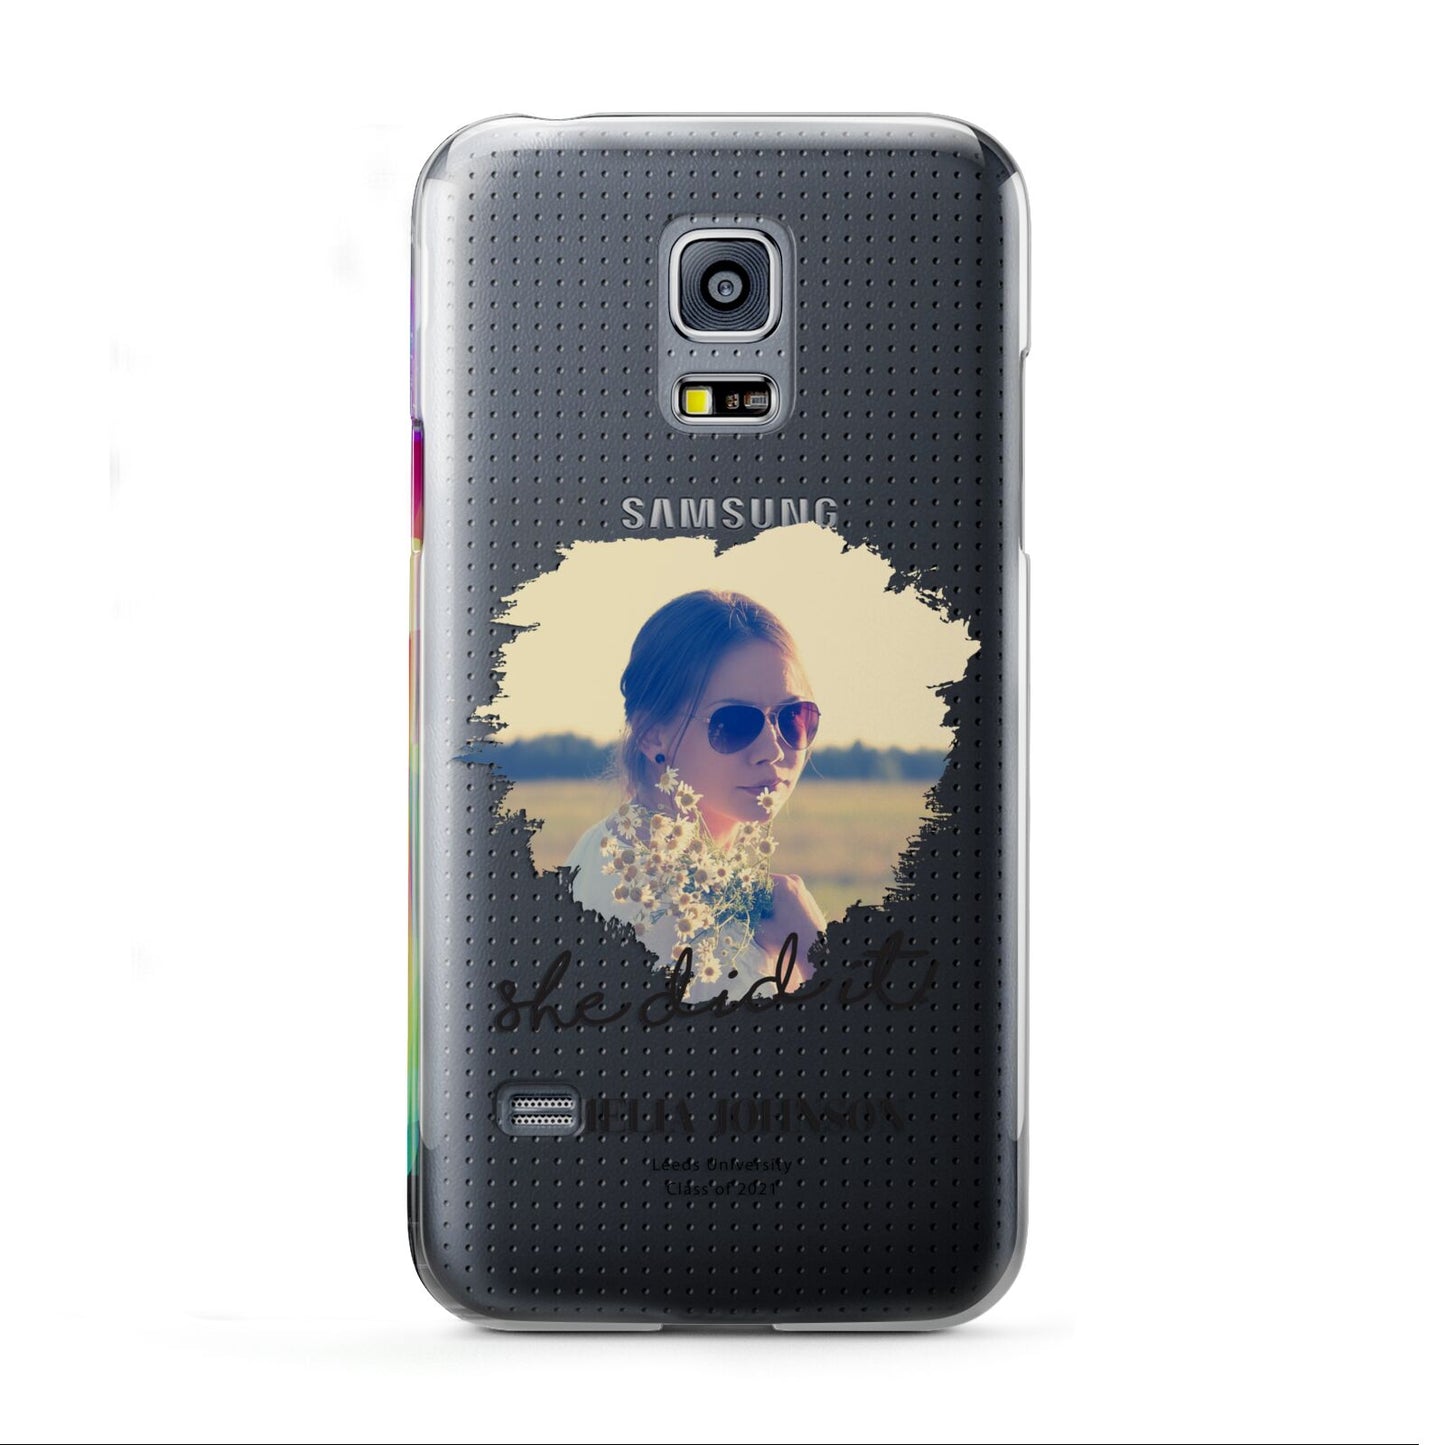 She Did It Graduation Photo with Name Samsung Galaxy S5 Mini Case